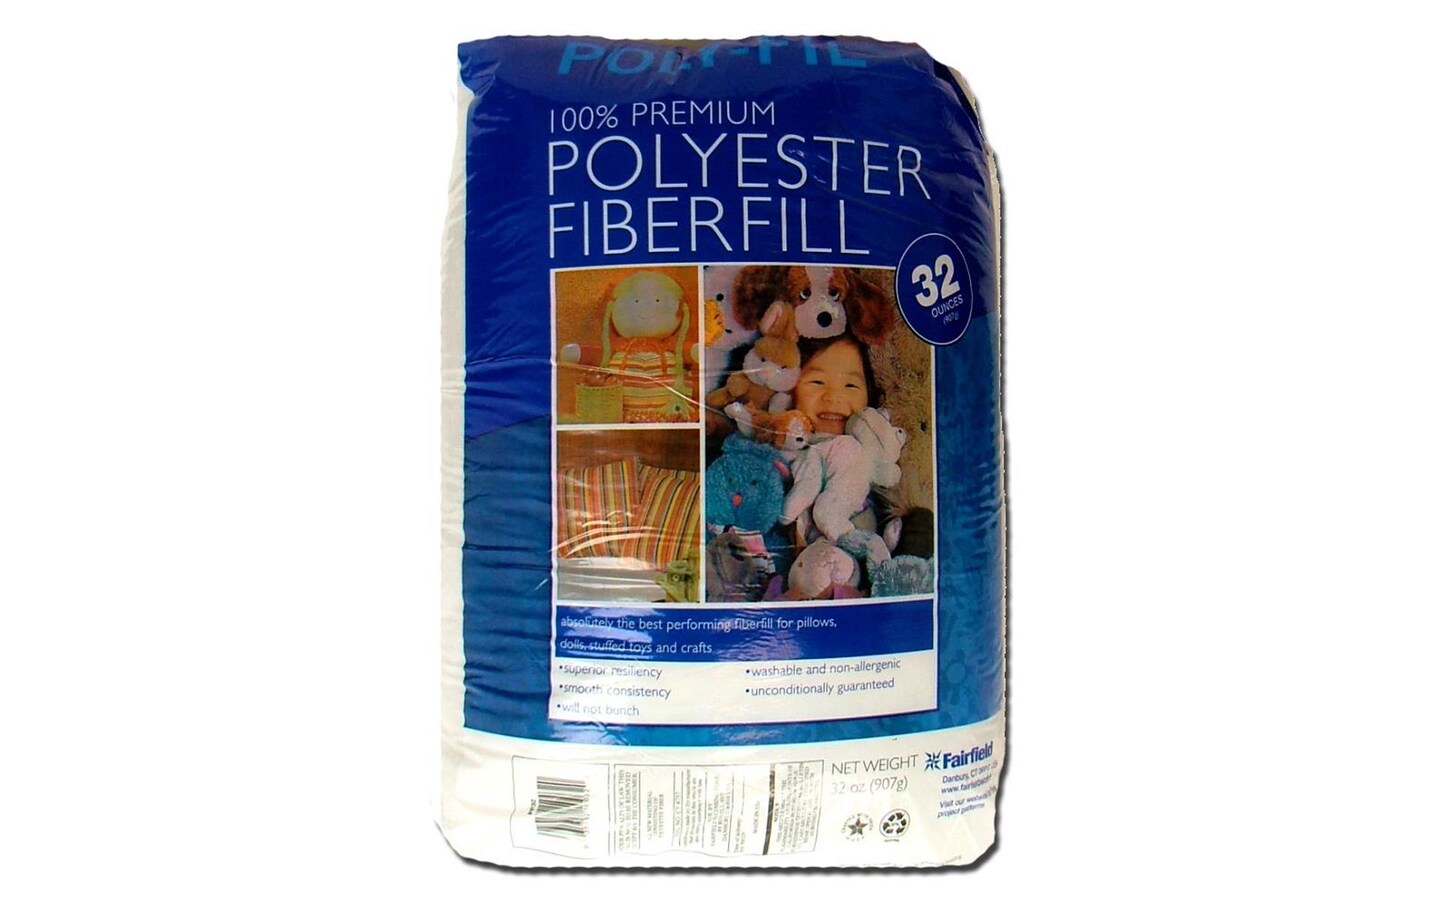 Poly-Fil Premium Polyester Fiber Fill by Fairfield (32oz)